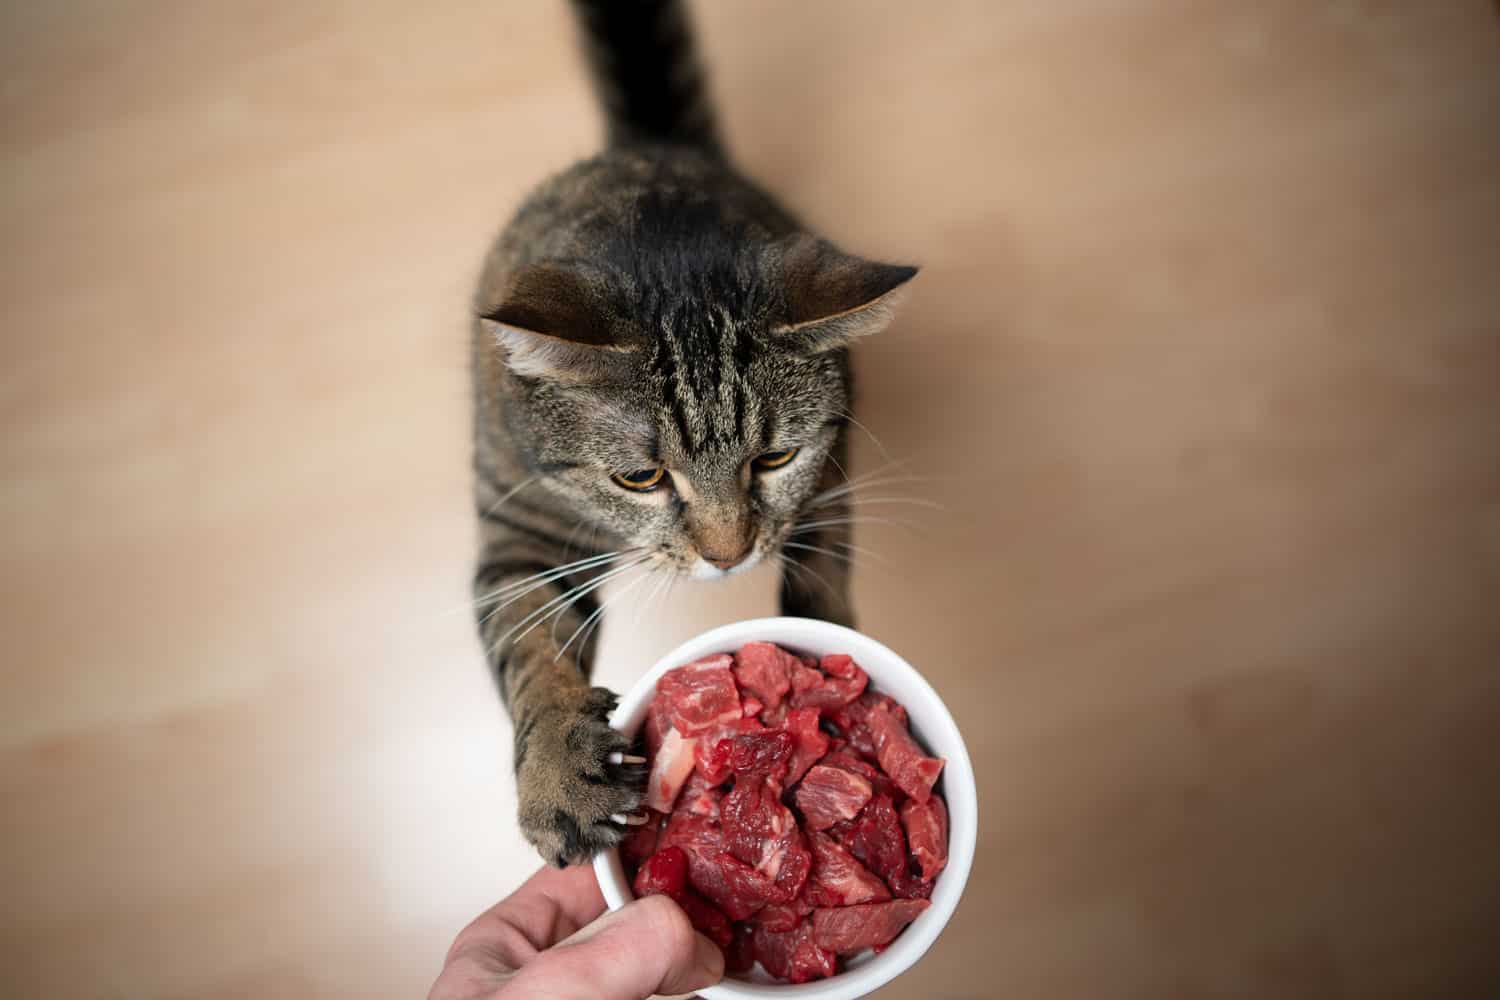 tabby cat rearing up to reach feeding dish with raw meat held by pet owner's hand